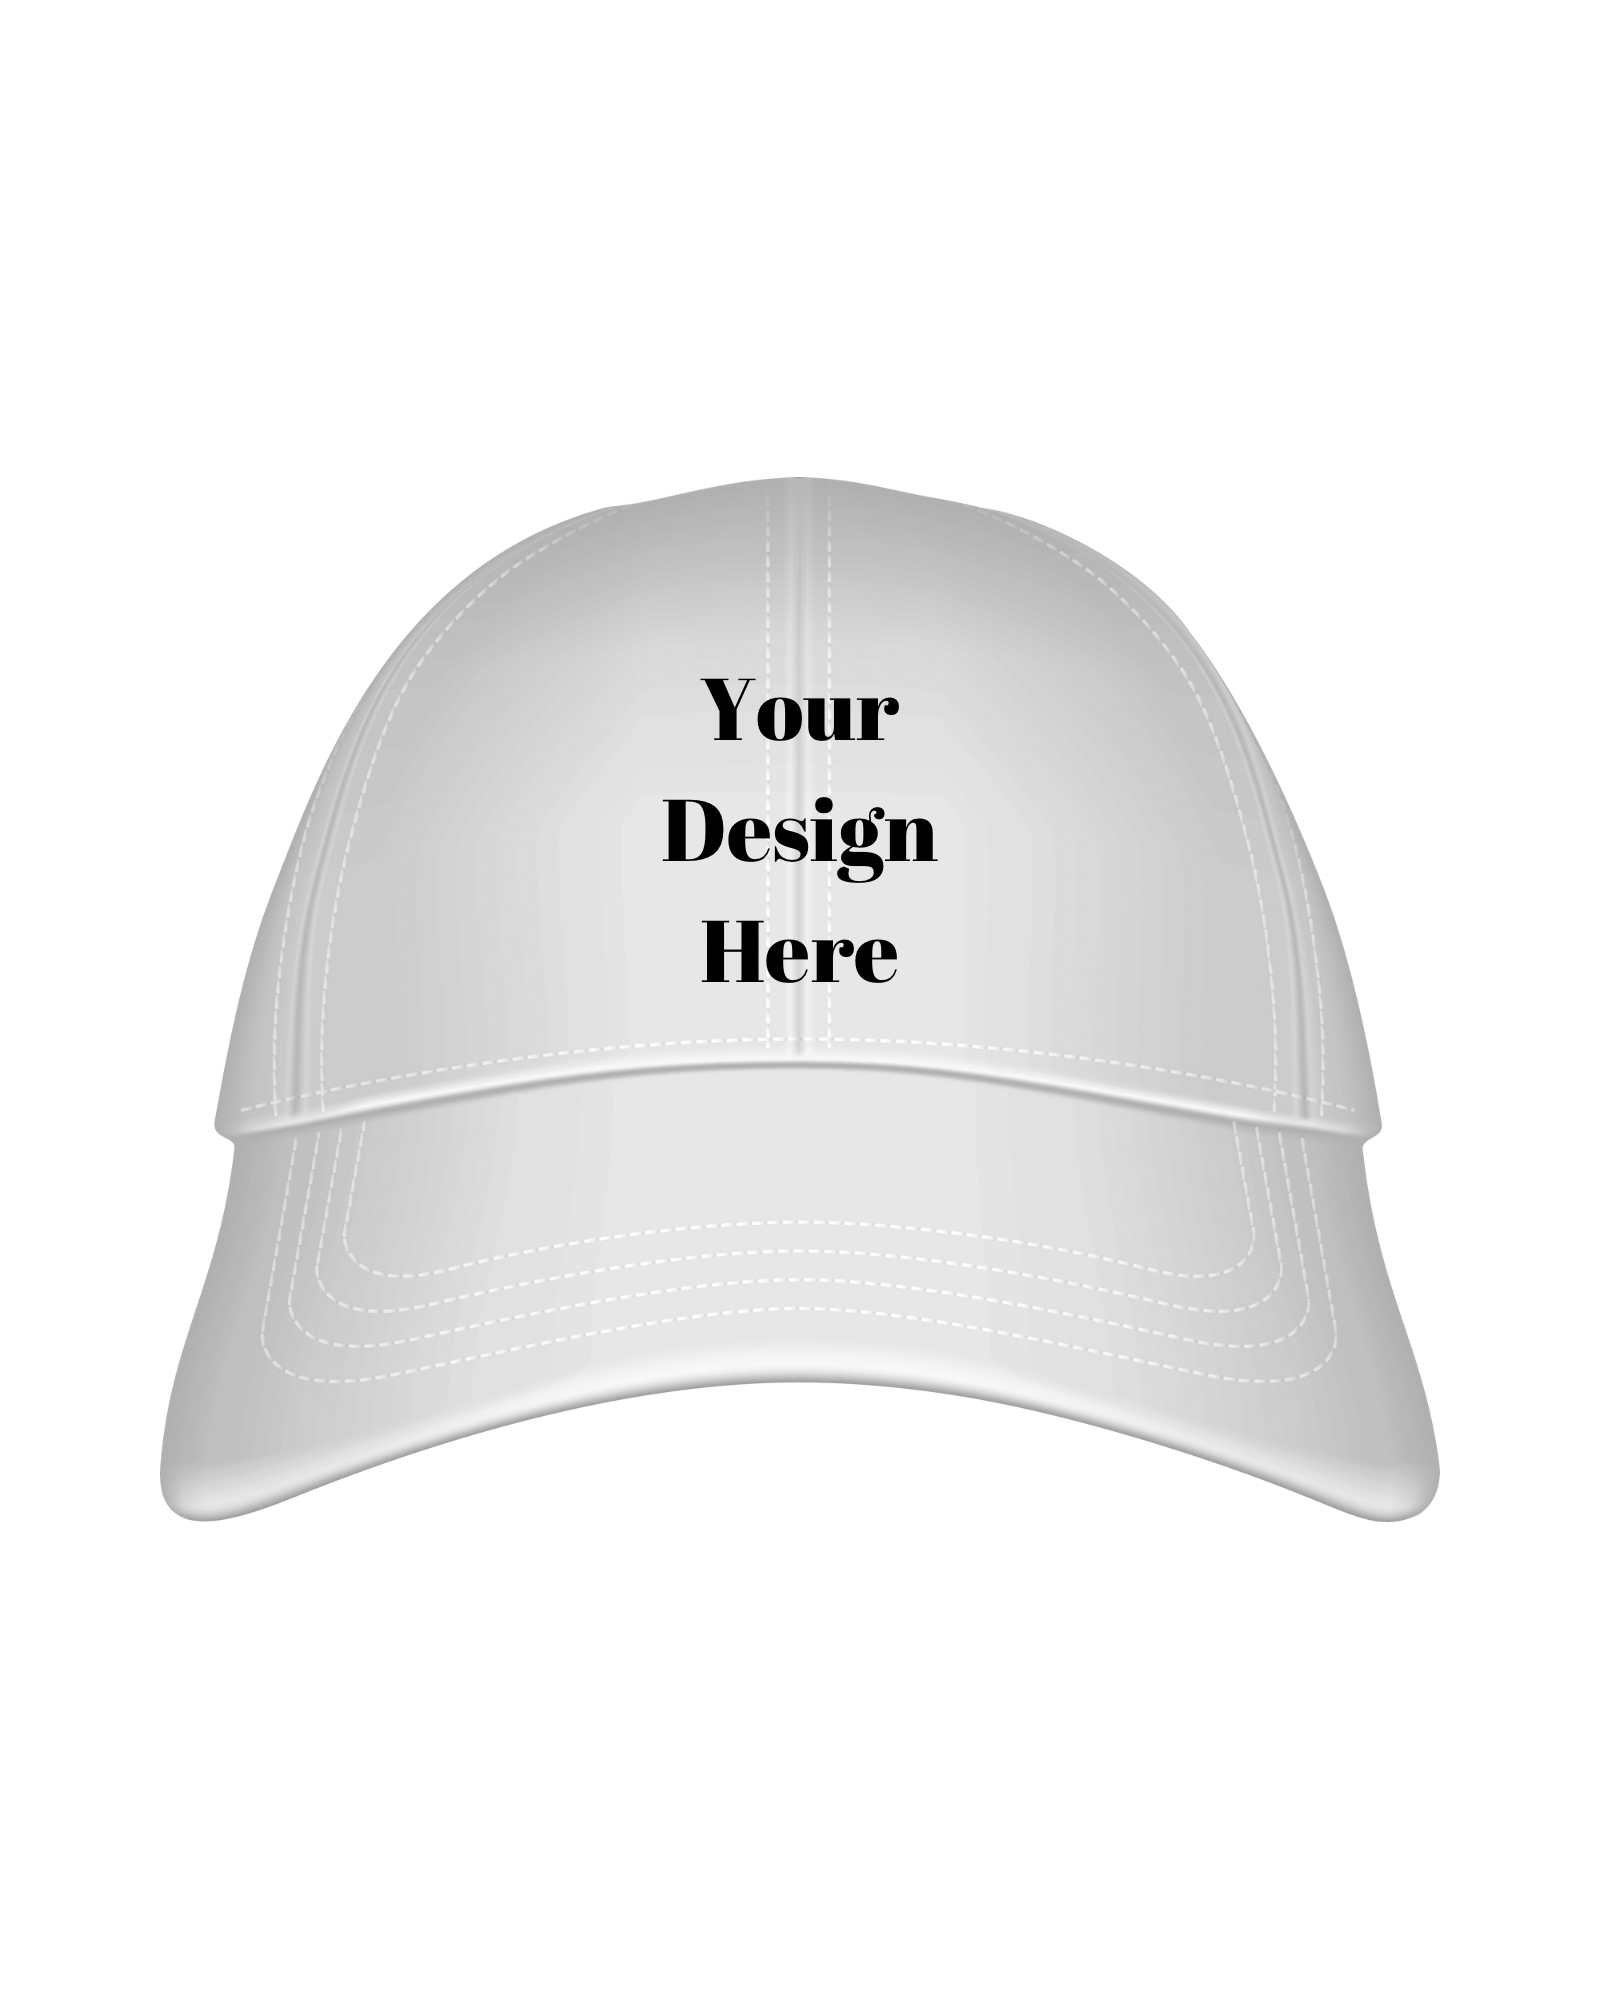 Personalized Caps / Hats